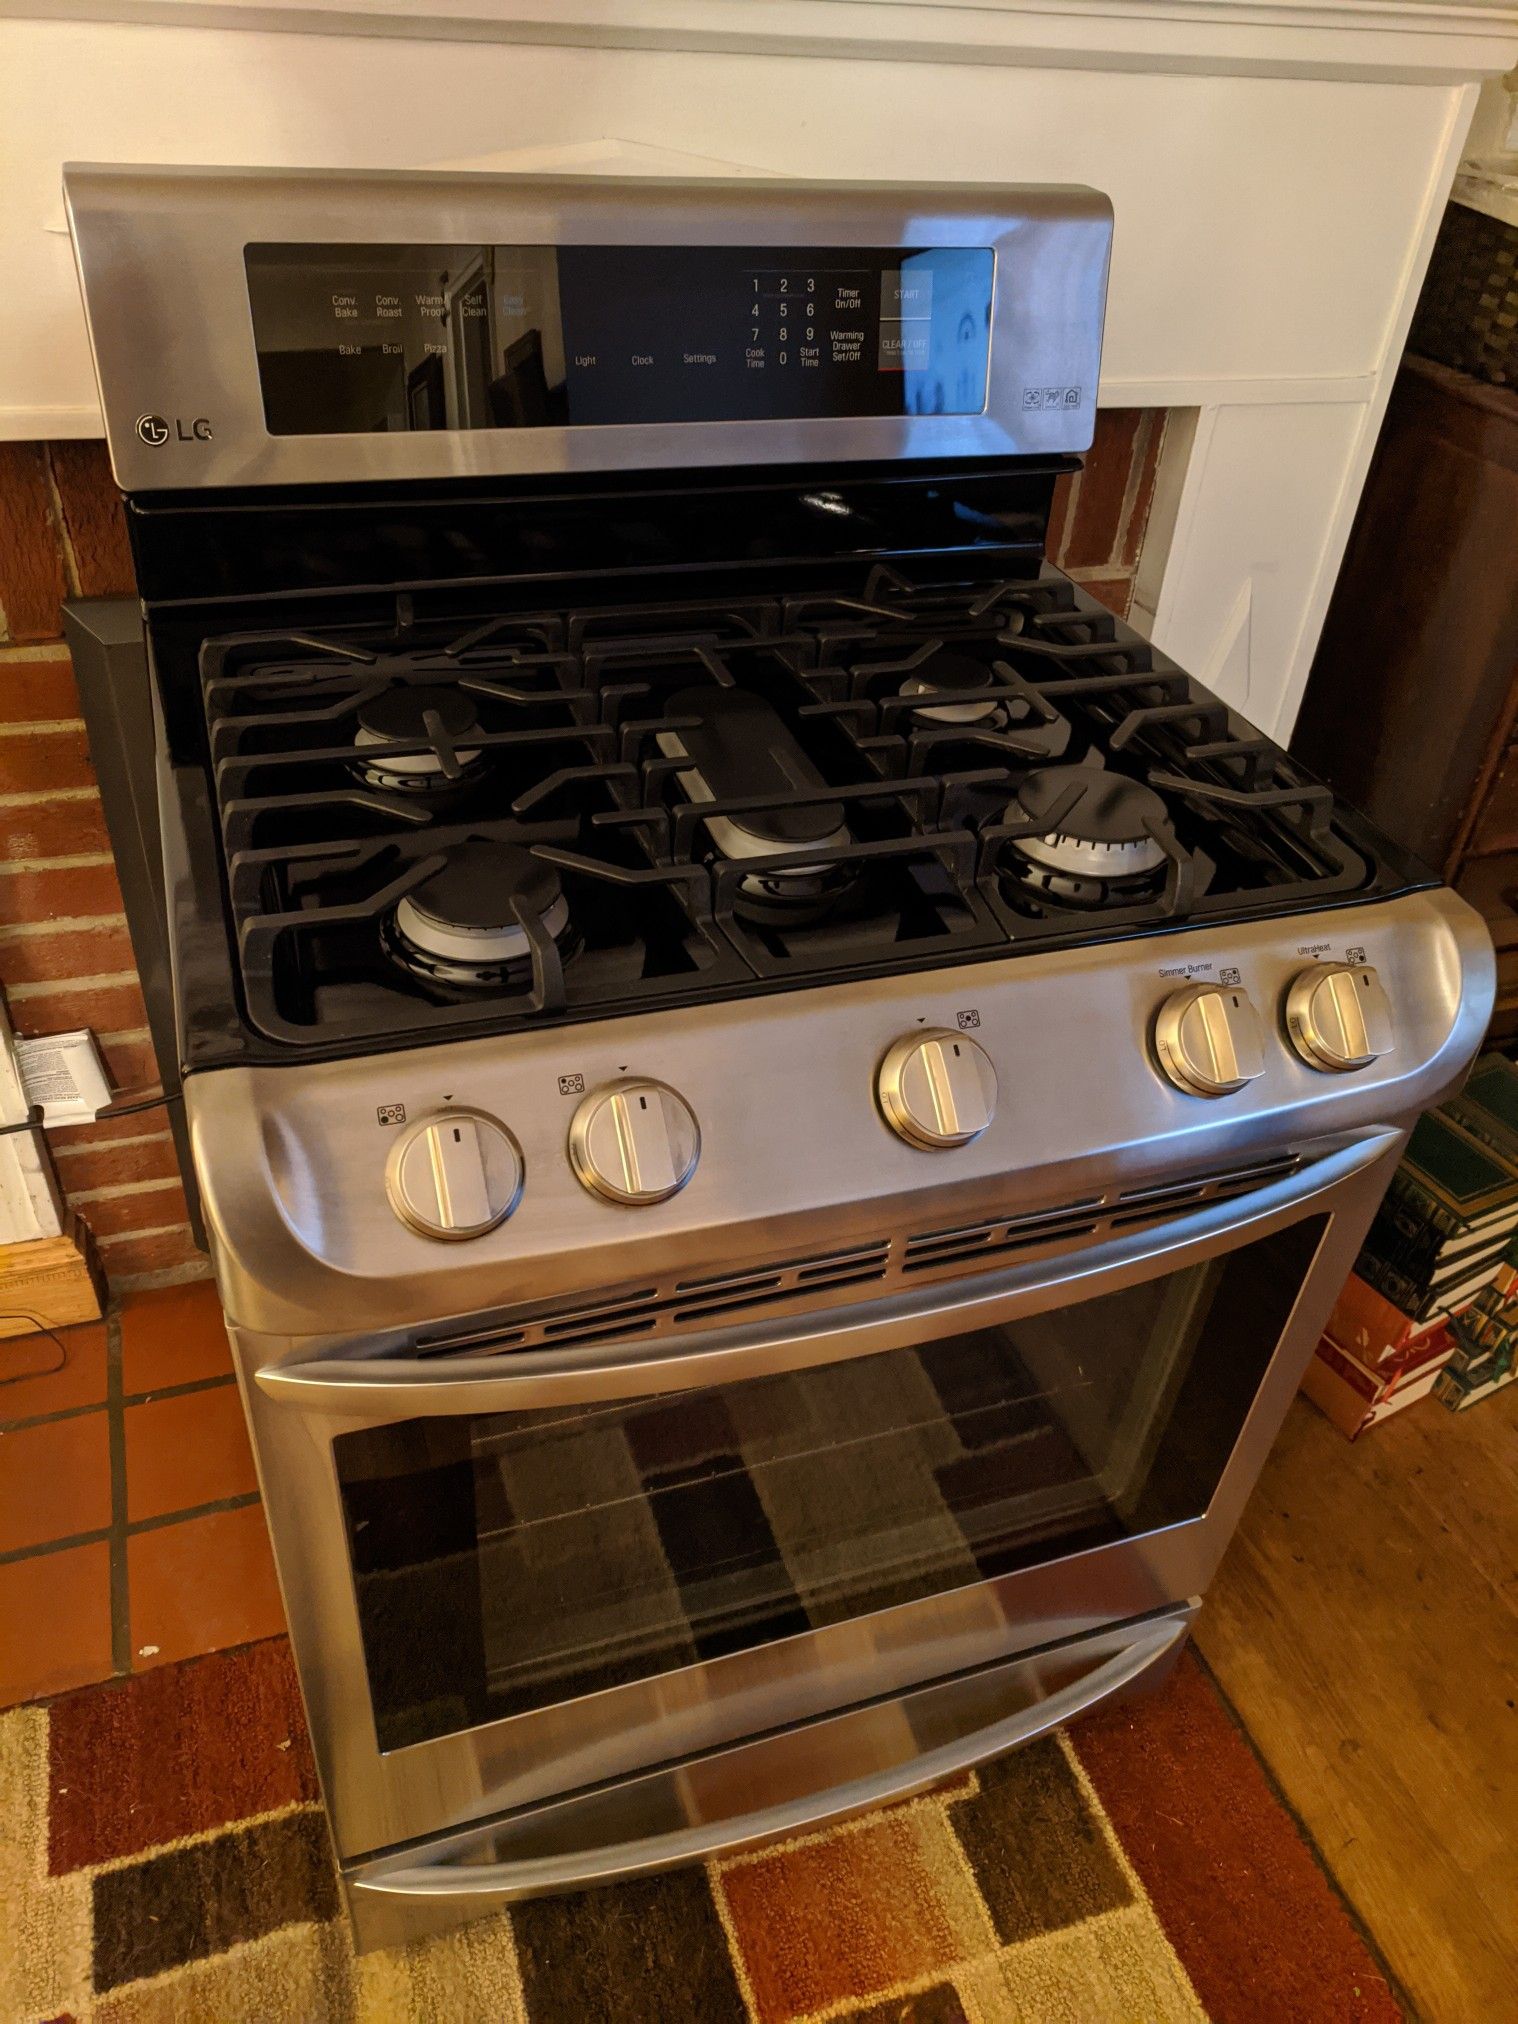 LG Gas Range. Mint condition. ProBake Convection oven, stove. Originally $1,749 after tax.